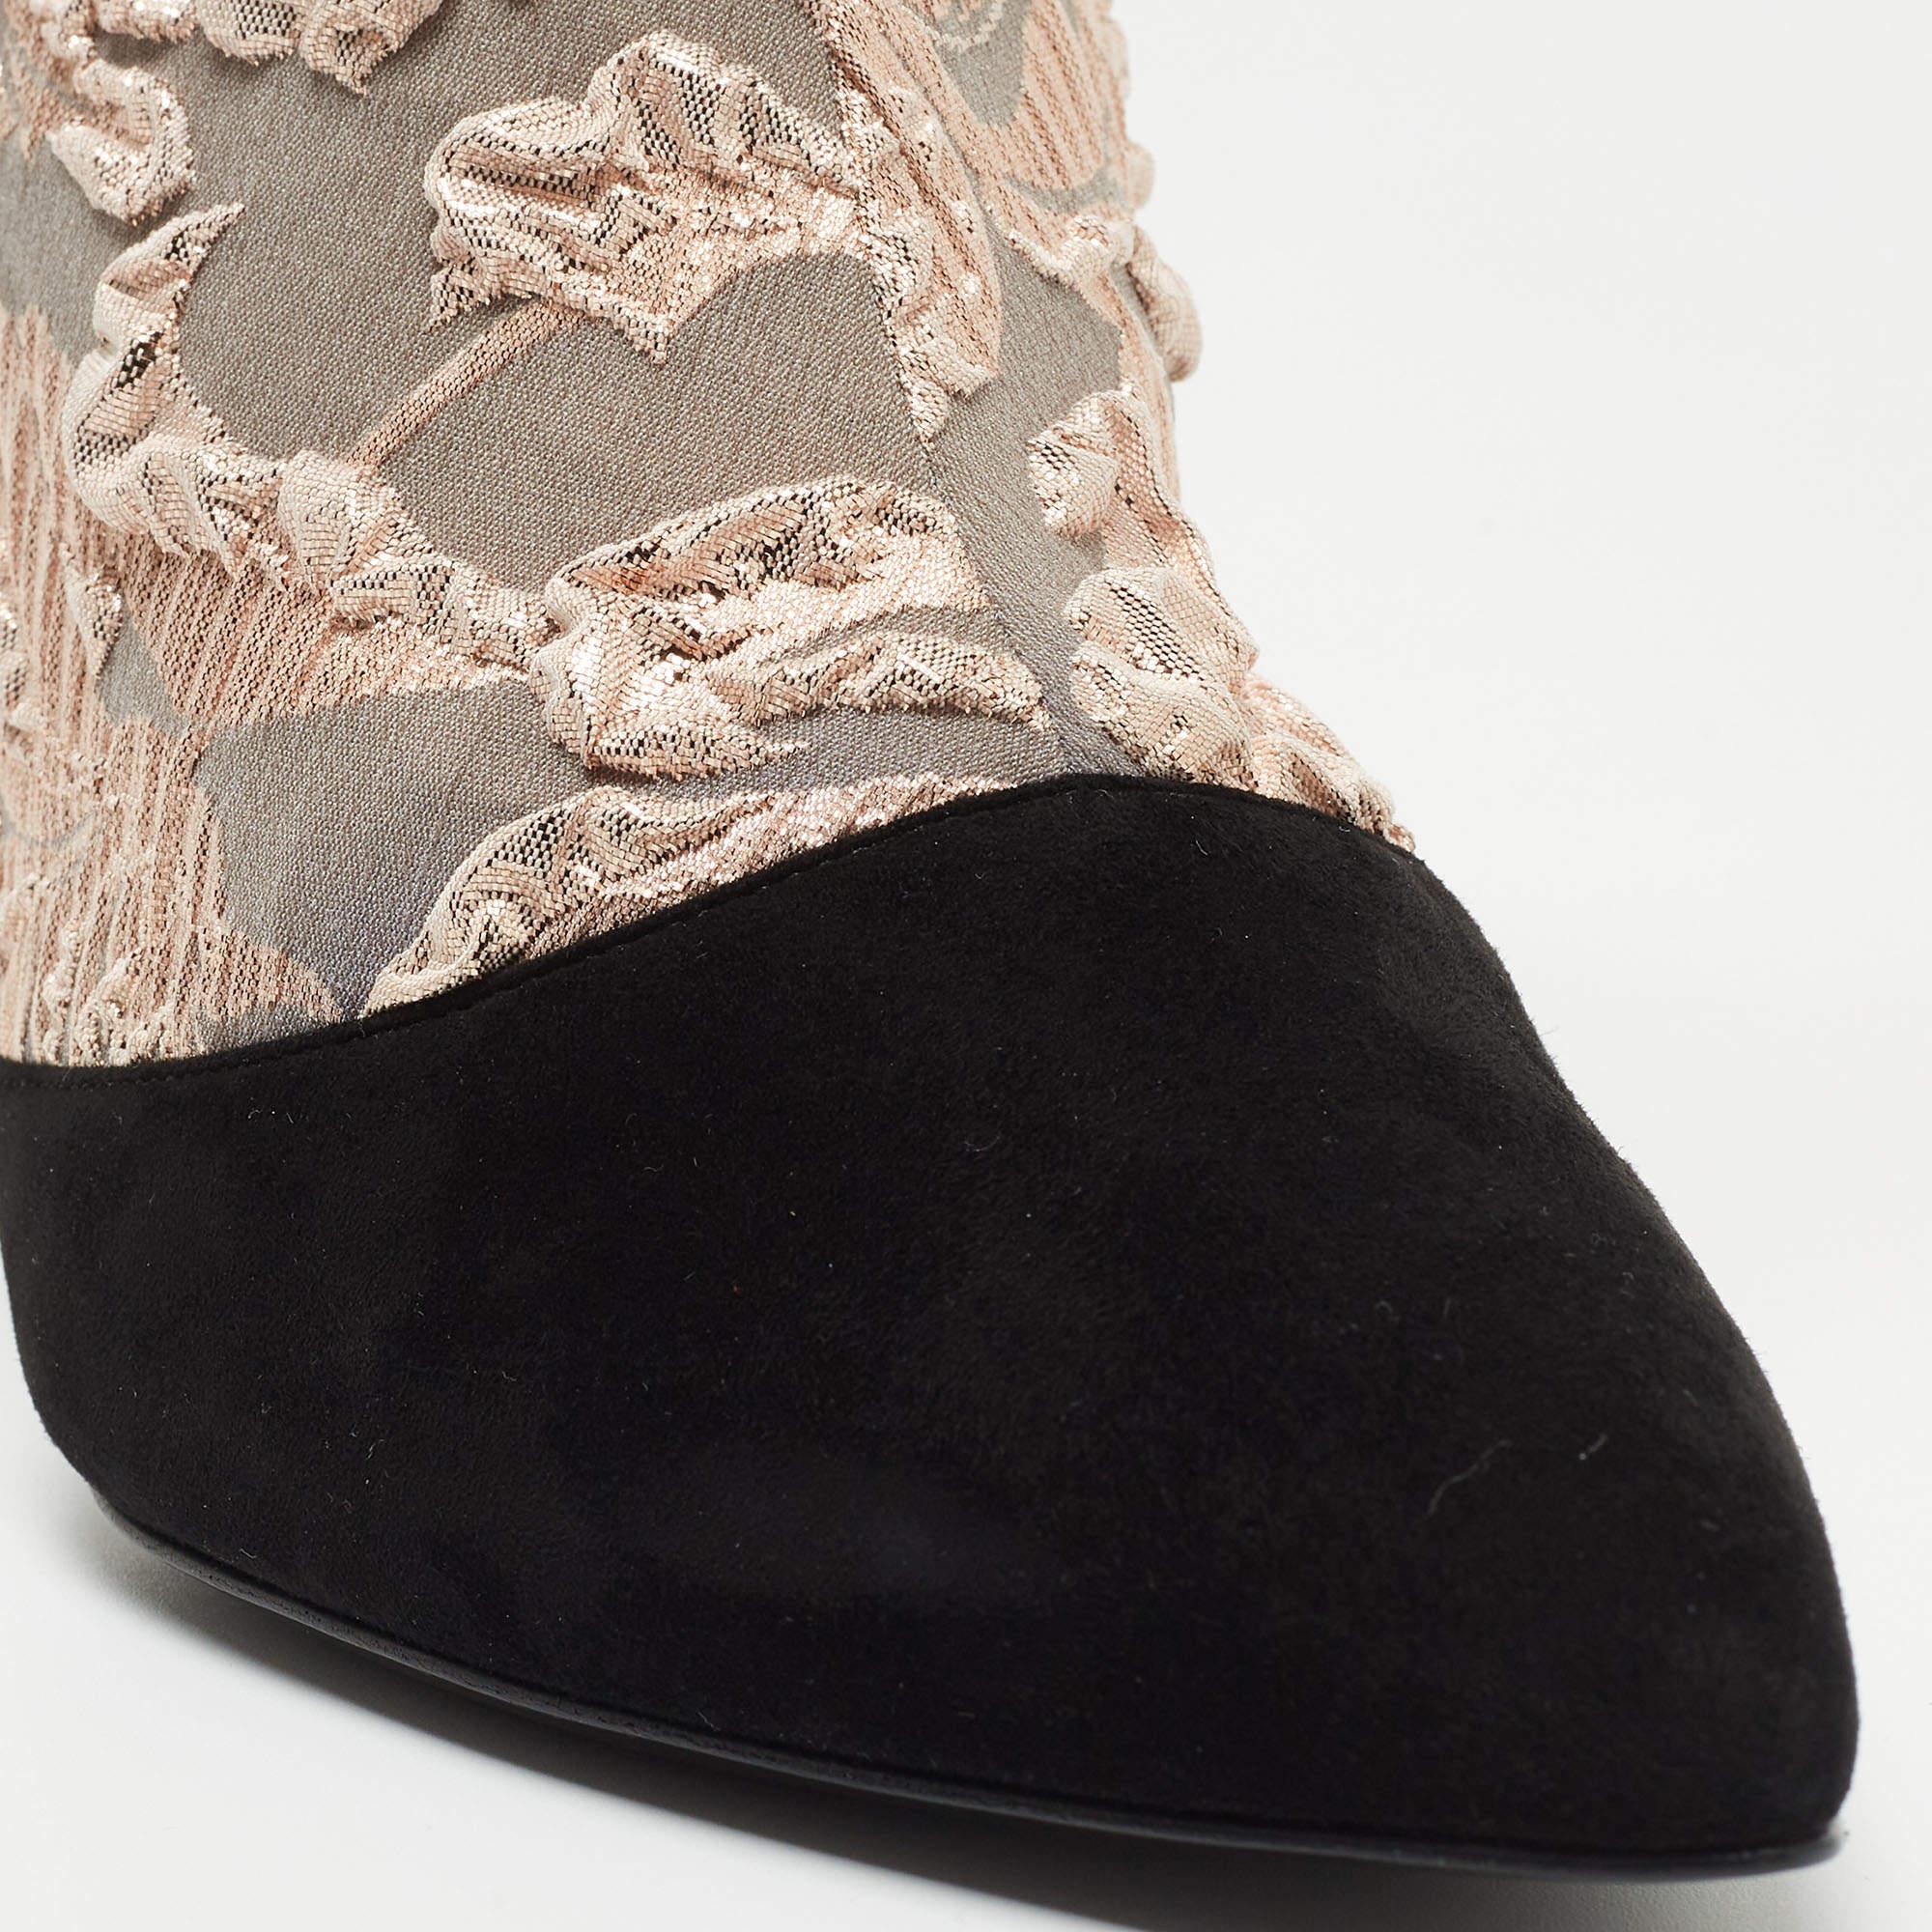 Pierre Hardy Black/Metallic Peach Fabric and Suede Dolly Pointed Toe Ankle Booti For Sale 4